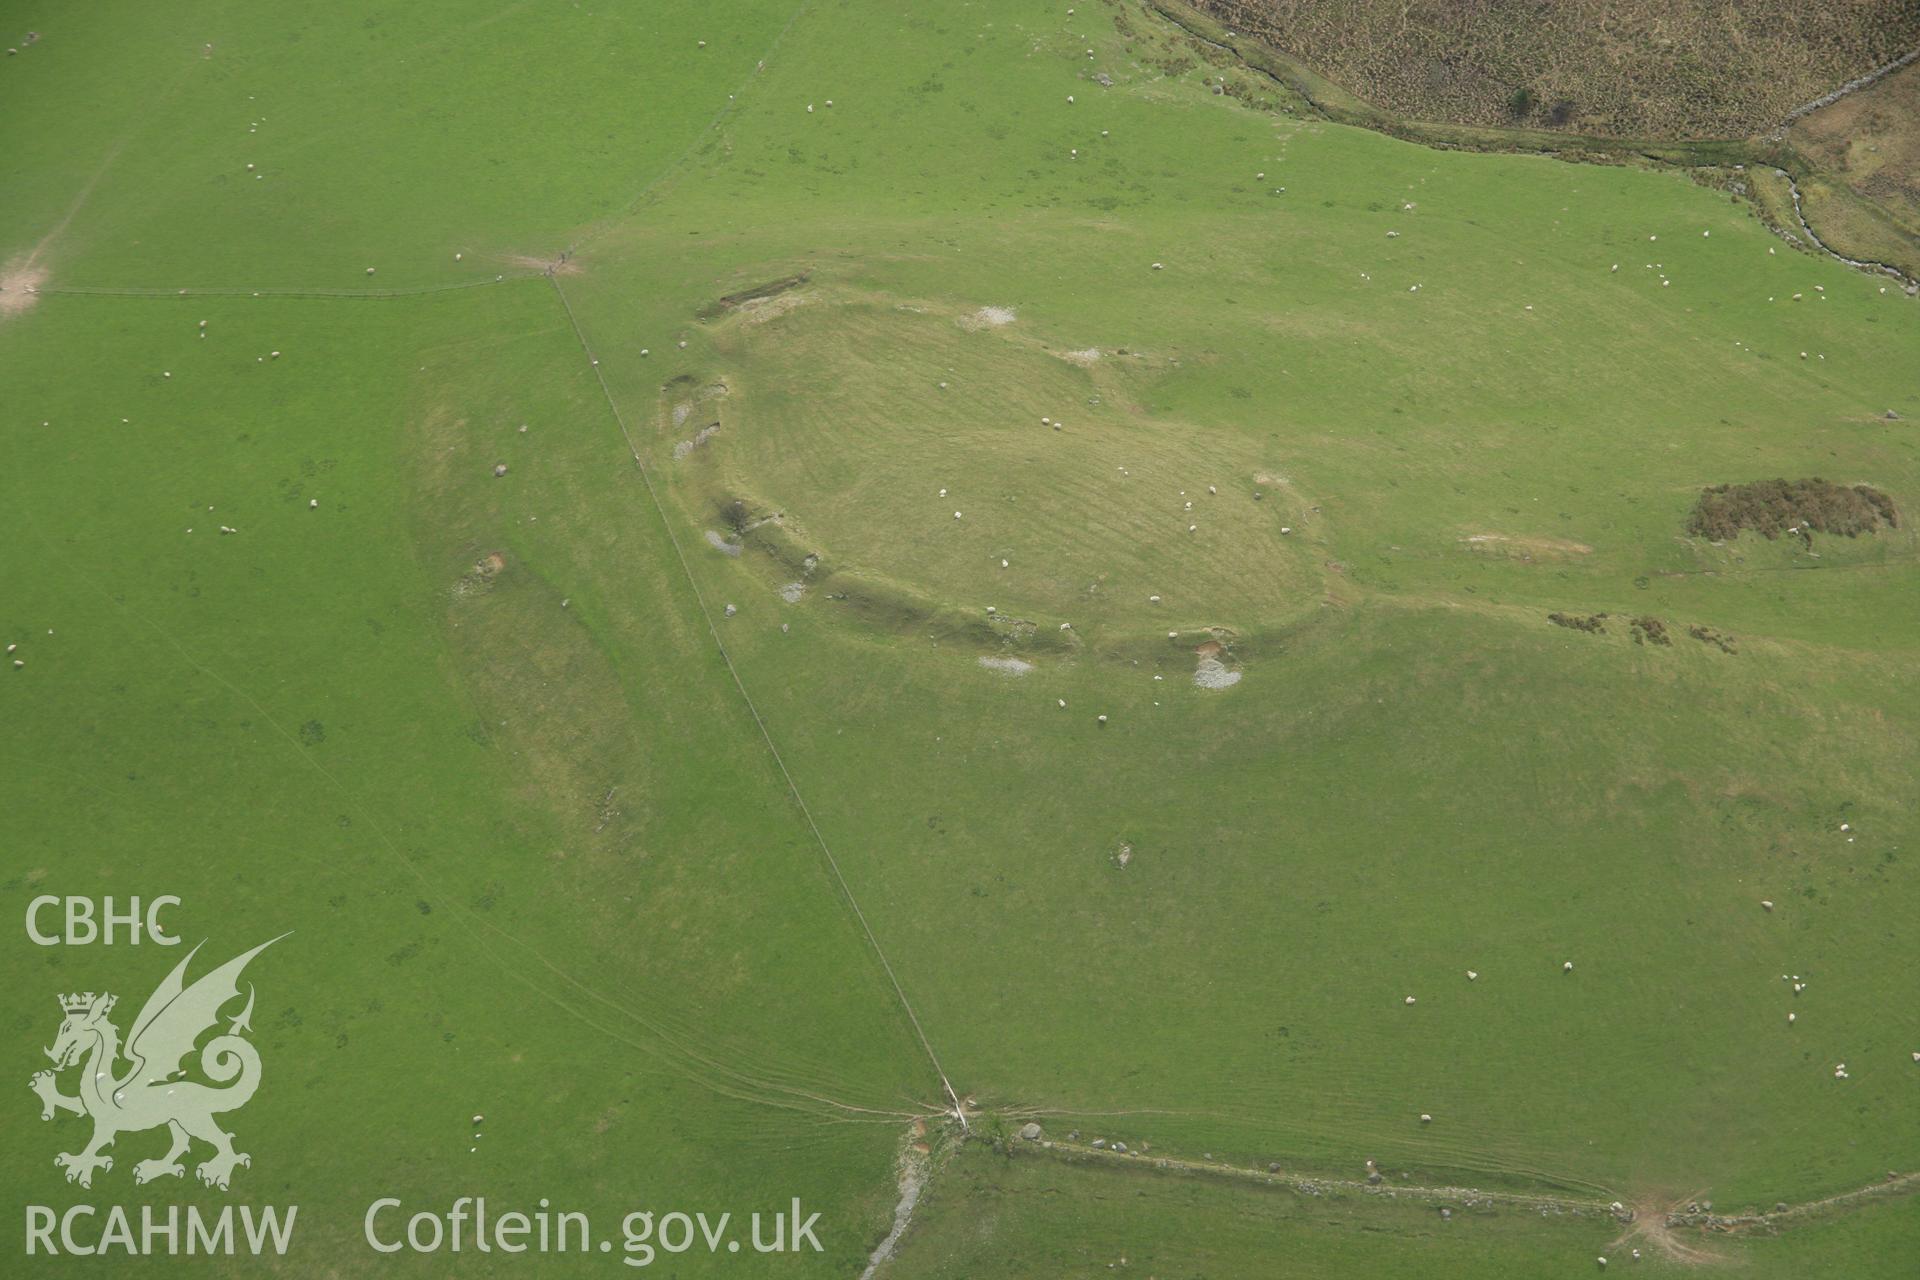 RCAHMW colour oblique aerial photograph of Pen-y-Castell Hillfort. Taken on 17 April 2007 by Toby Driver